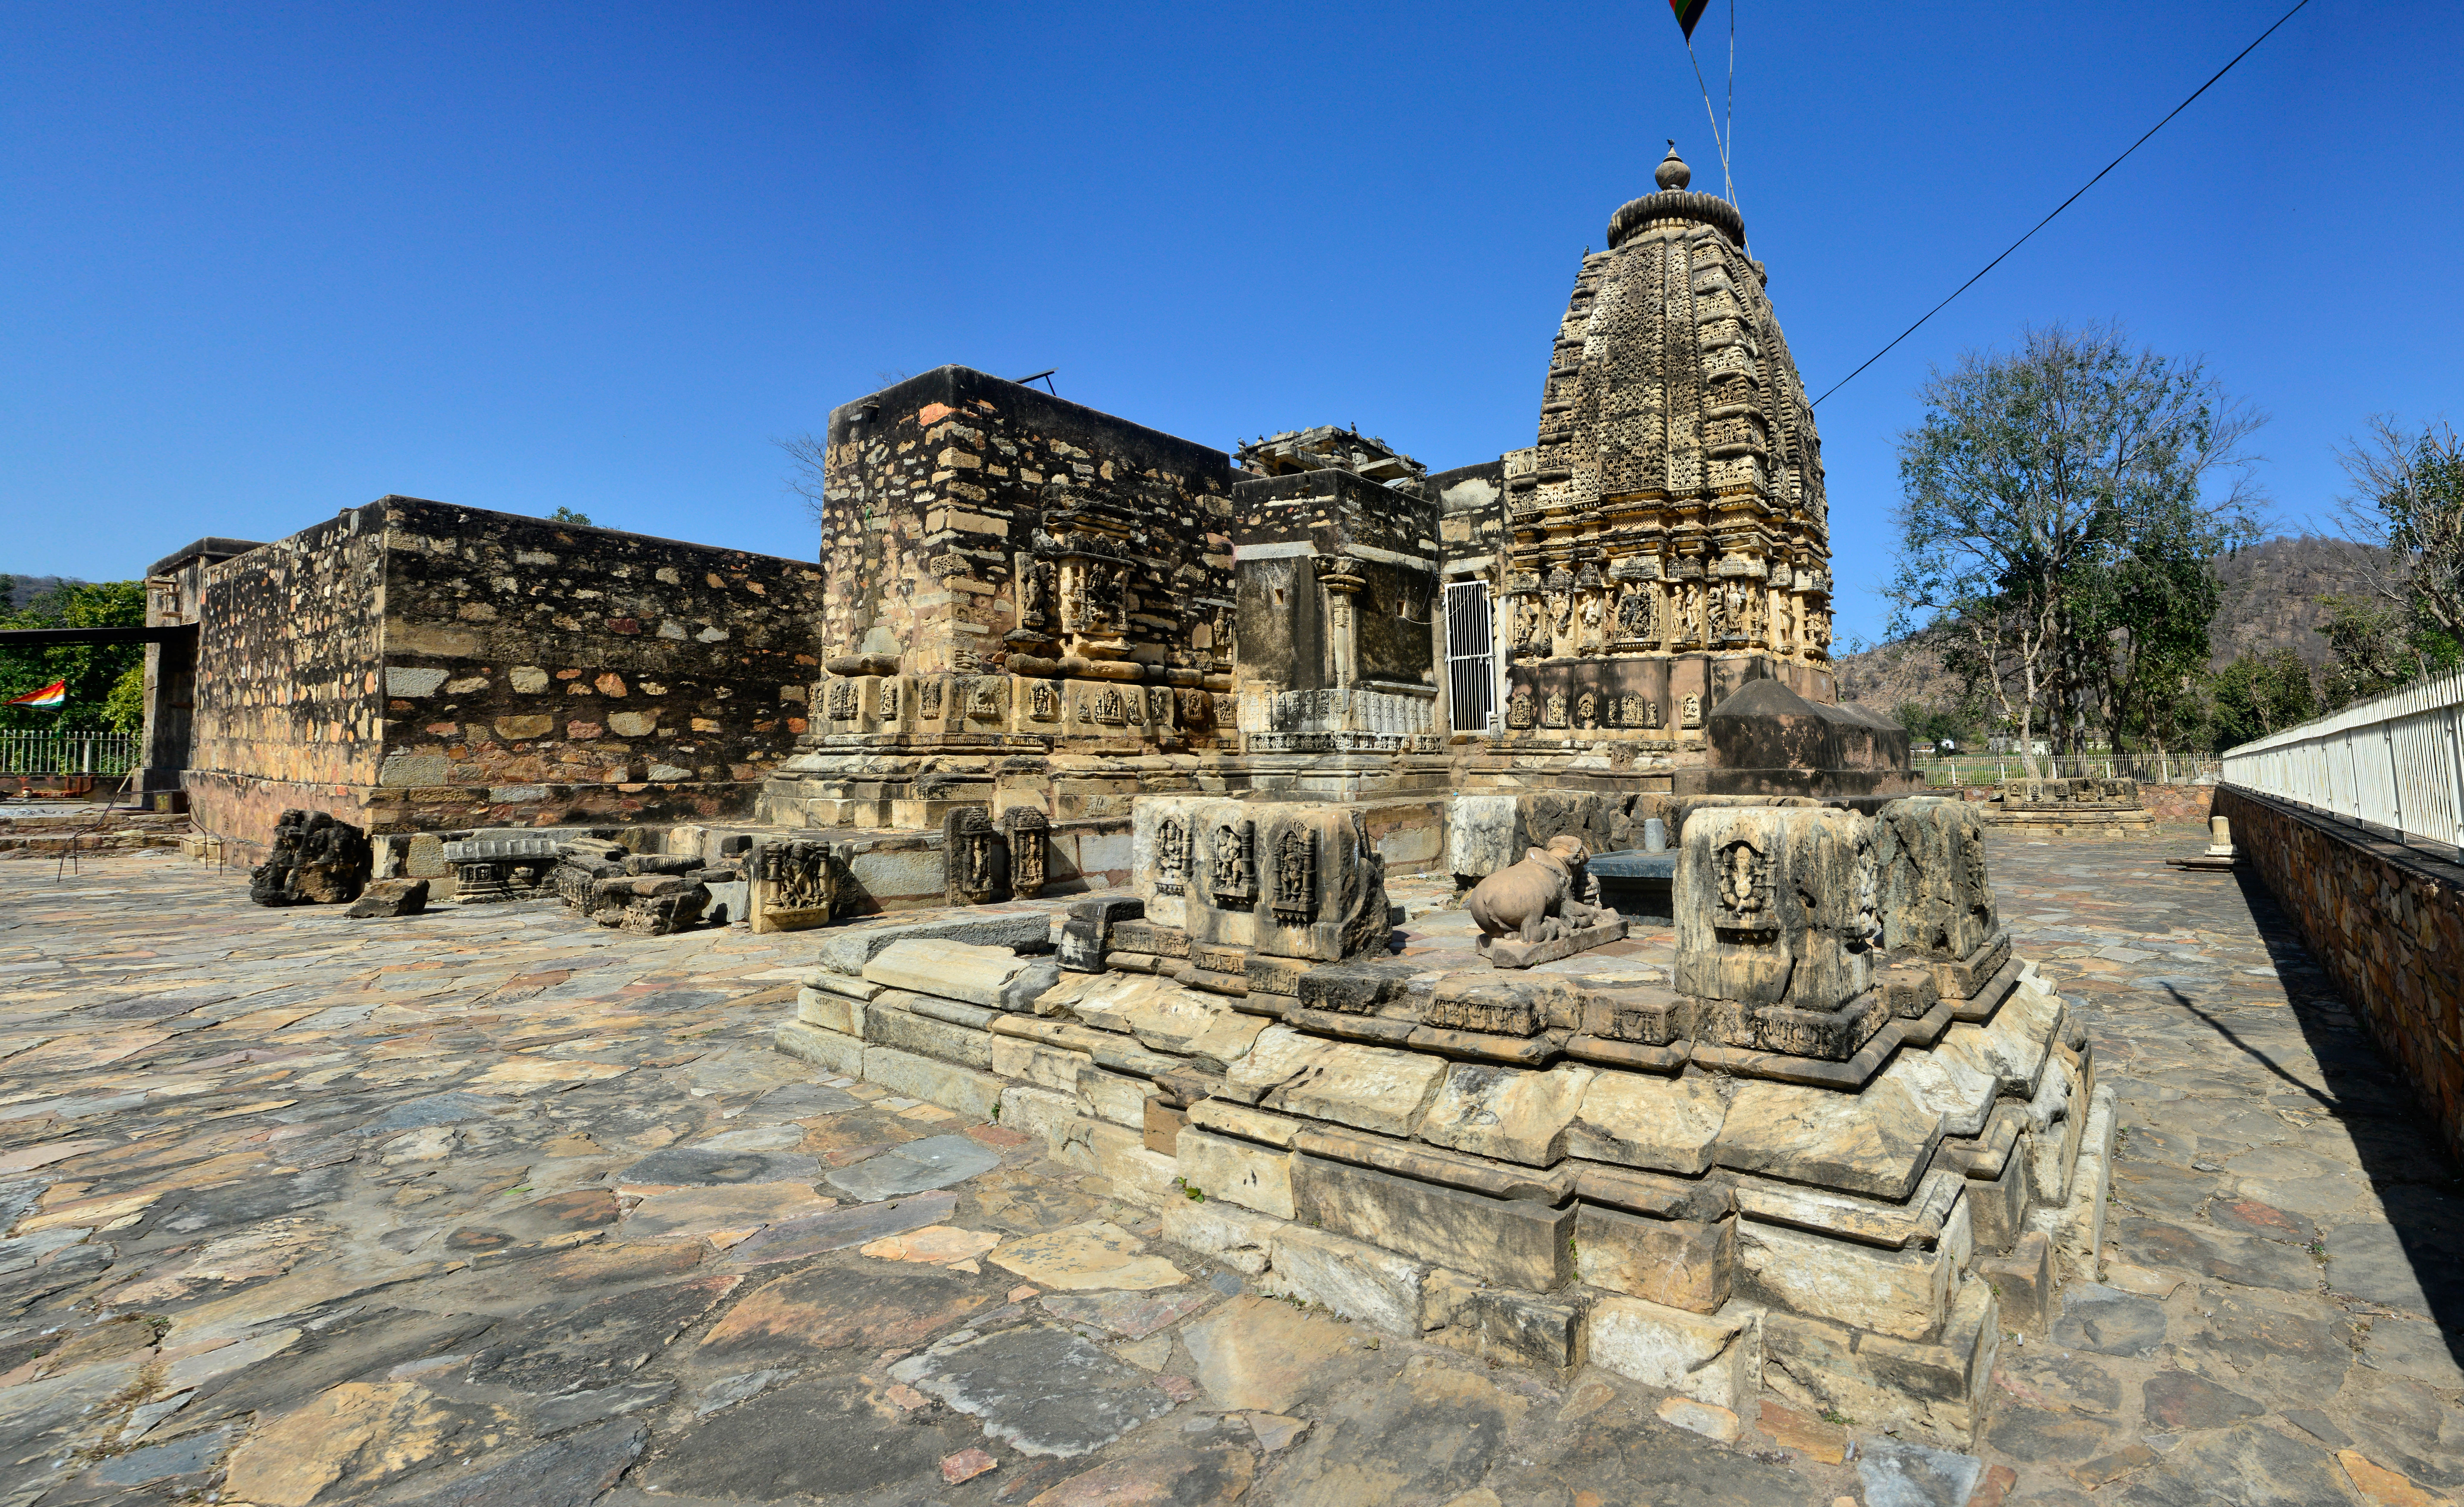 This is a view of the Neelkanth Mahadev Temple seen from its southeastern corner. Also pictured here are the southern and eastern shrines of the temple as seen from the rear. The western side of the temple is its principal entrance, and the eastern shrine has a partially preserved and conserved shrine. 